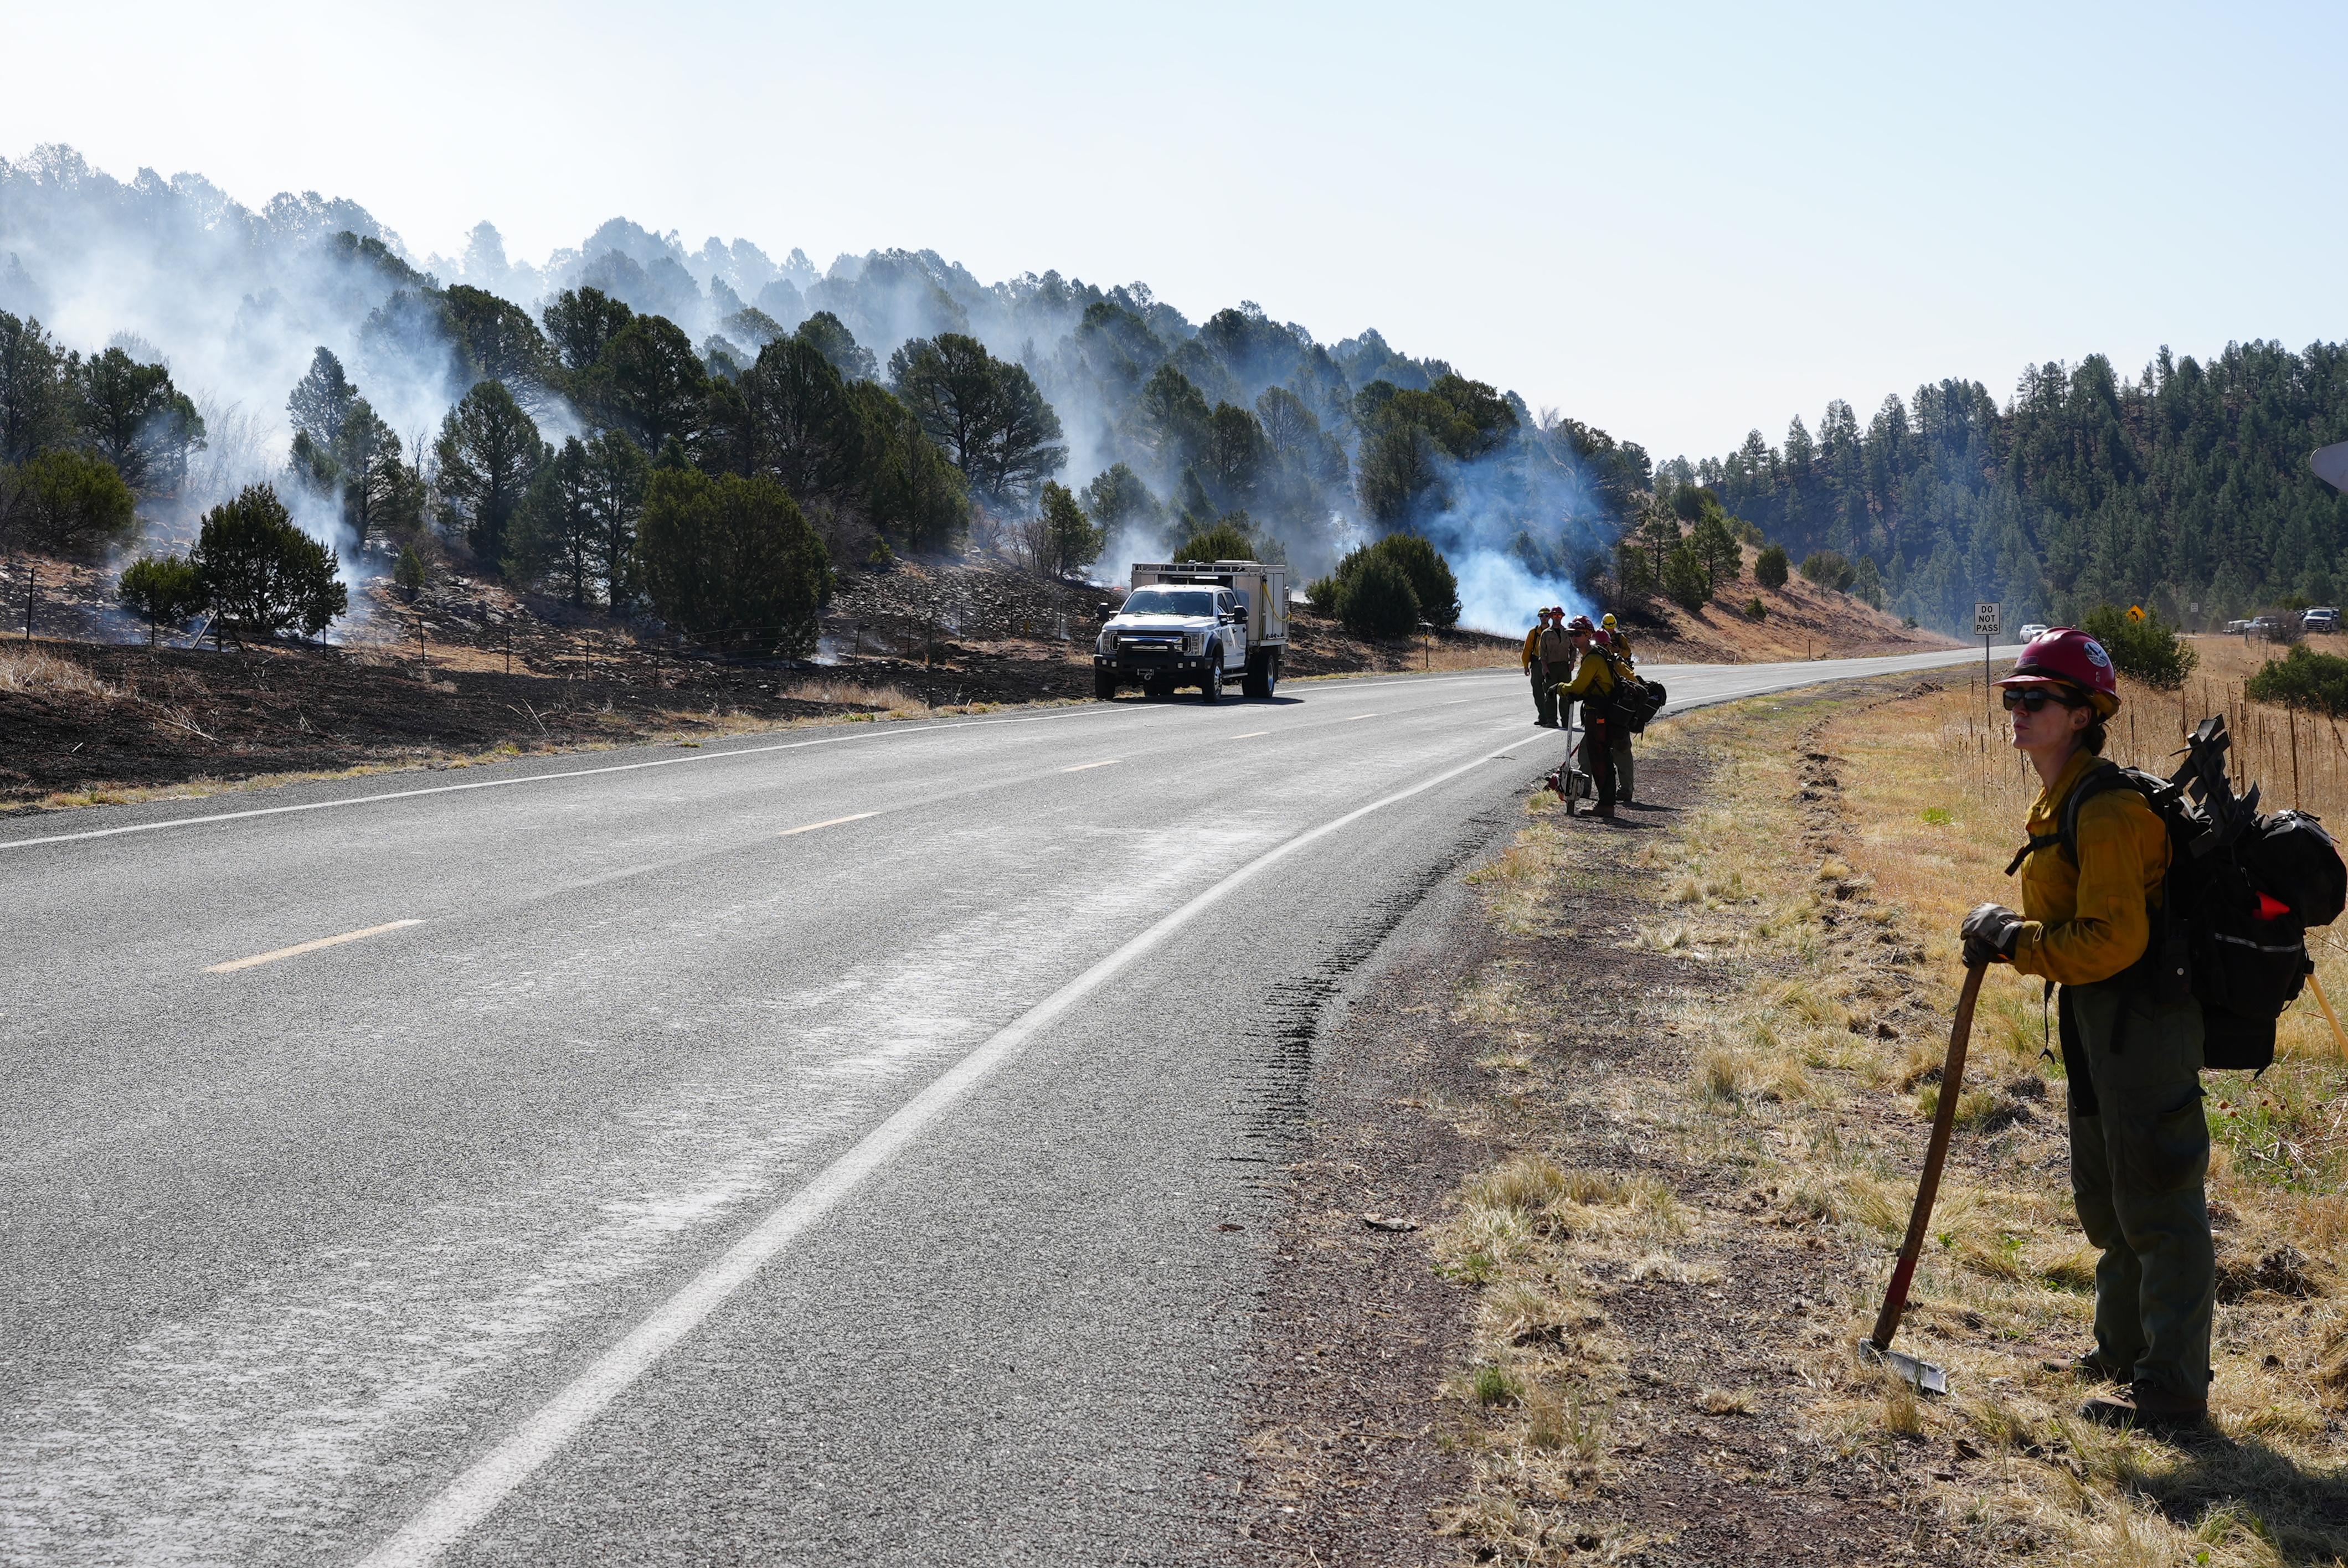 Firefighters are burning fuels along Highway 283 west of Las Vegas, NM to create a fire line to protect the community.